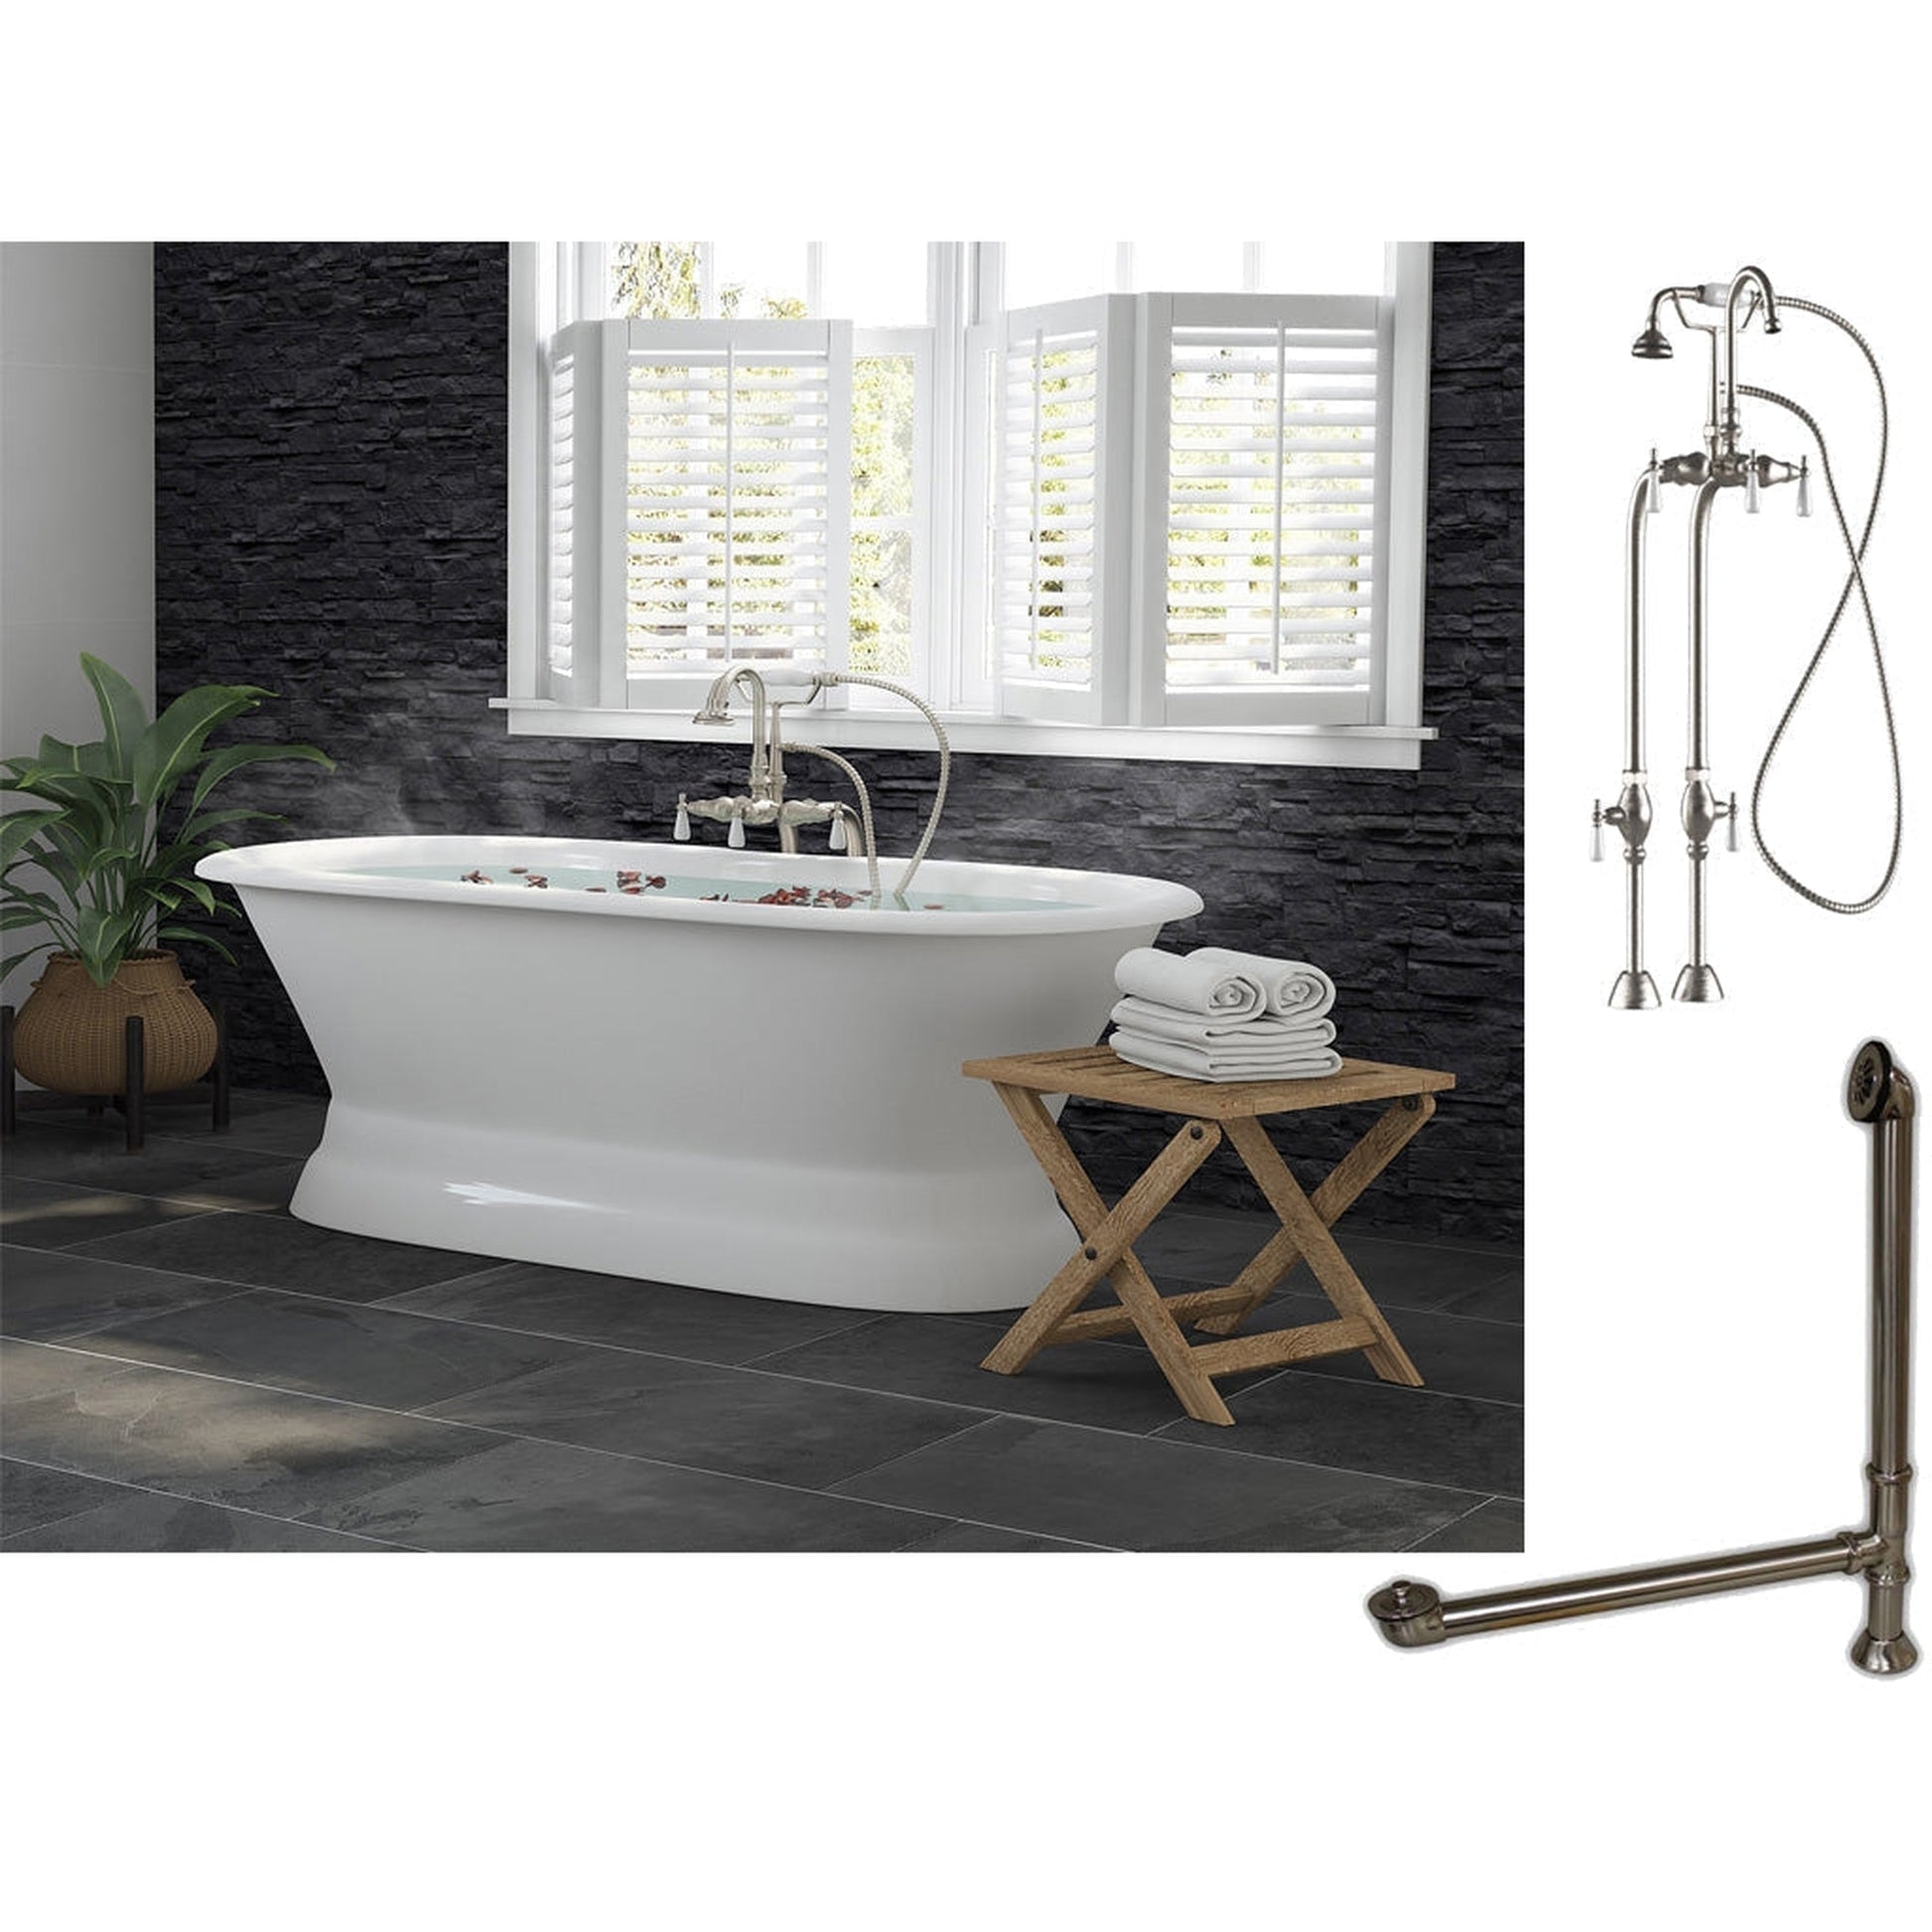 Cambridge Plumbing 66" White Cast Iron Double Ended Pedestal Bathtub With No Deck Holes And Complete Plumbing Package Including Freestanding English Telephone Gooseneck Faucet, Drain And Overflow Assembly In Brushed Nickel